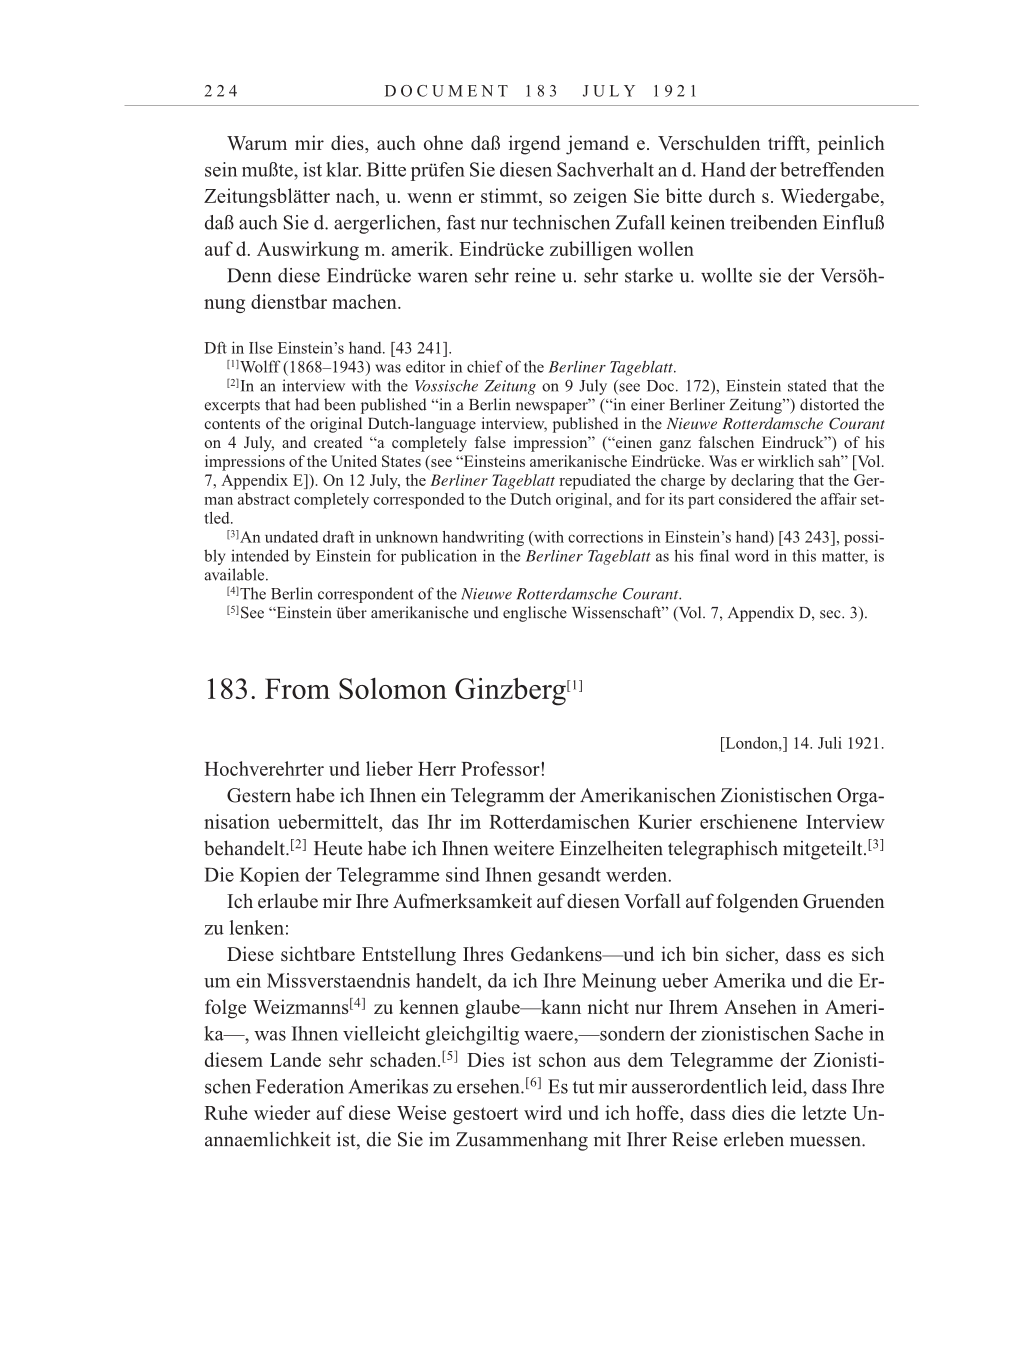 Volume 12: The Berlin Years: Correspondence January-December 1921 page 224